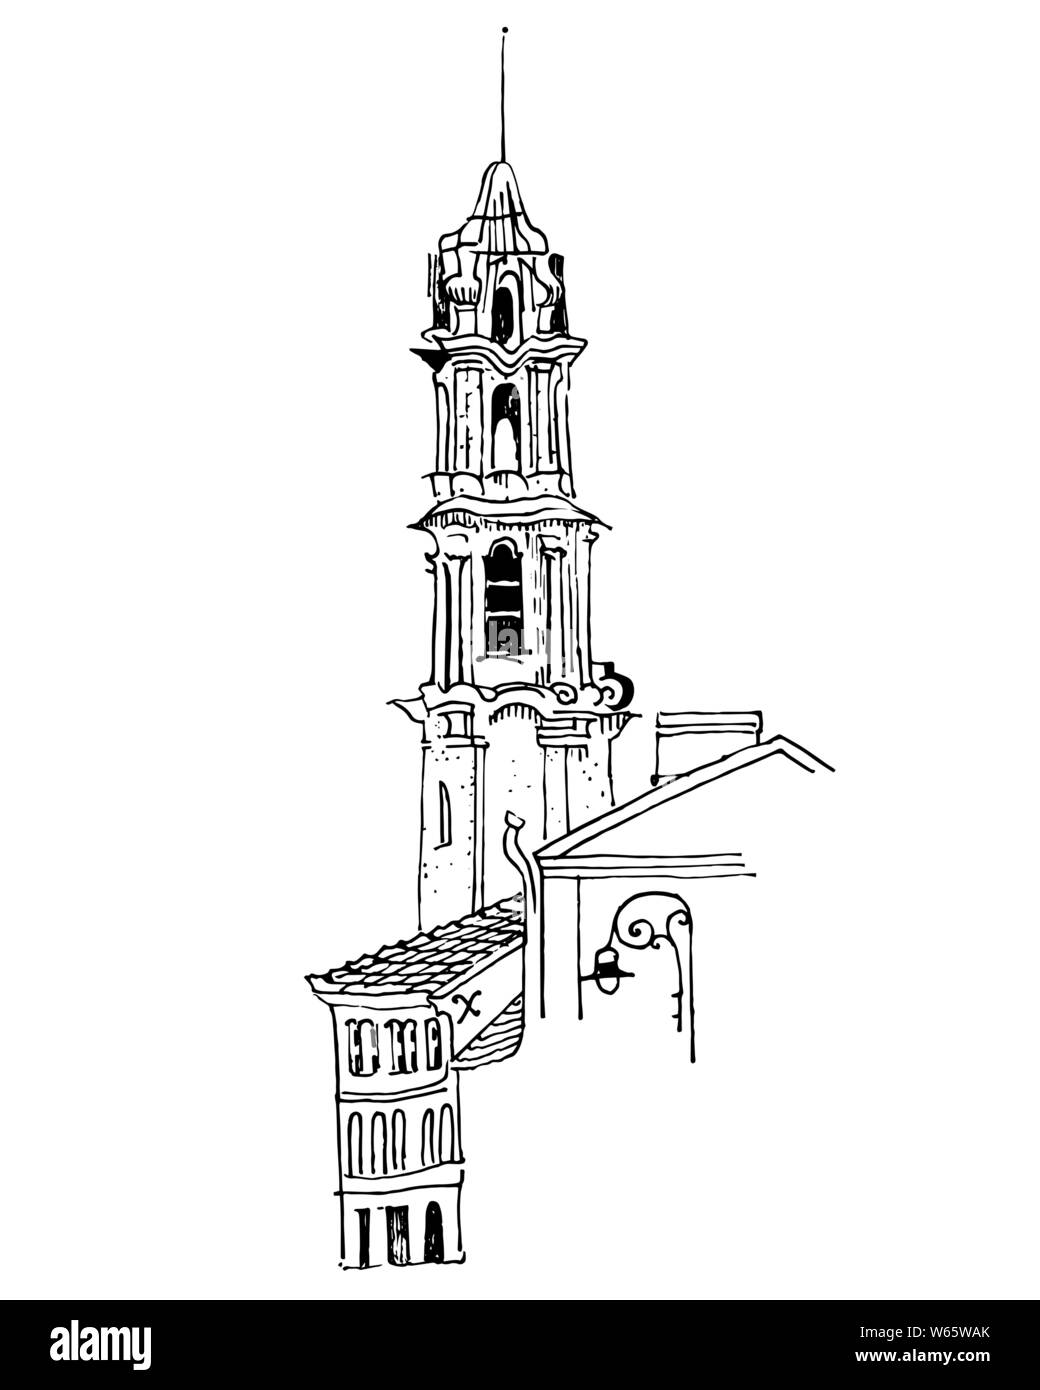 Old town motif. Bell tower, medieval houses, street lantern. Vilnius, Lithuania. Baltic states landmark. Postcard, coloring page. Hand drawn sketchy s Stock Vector